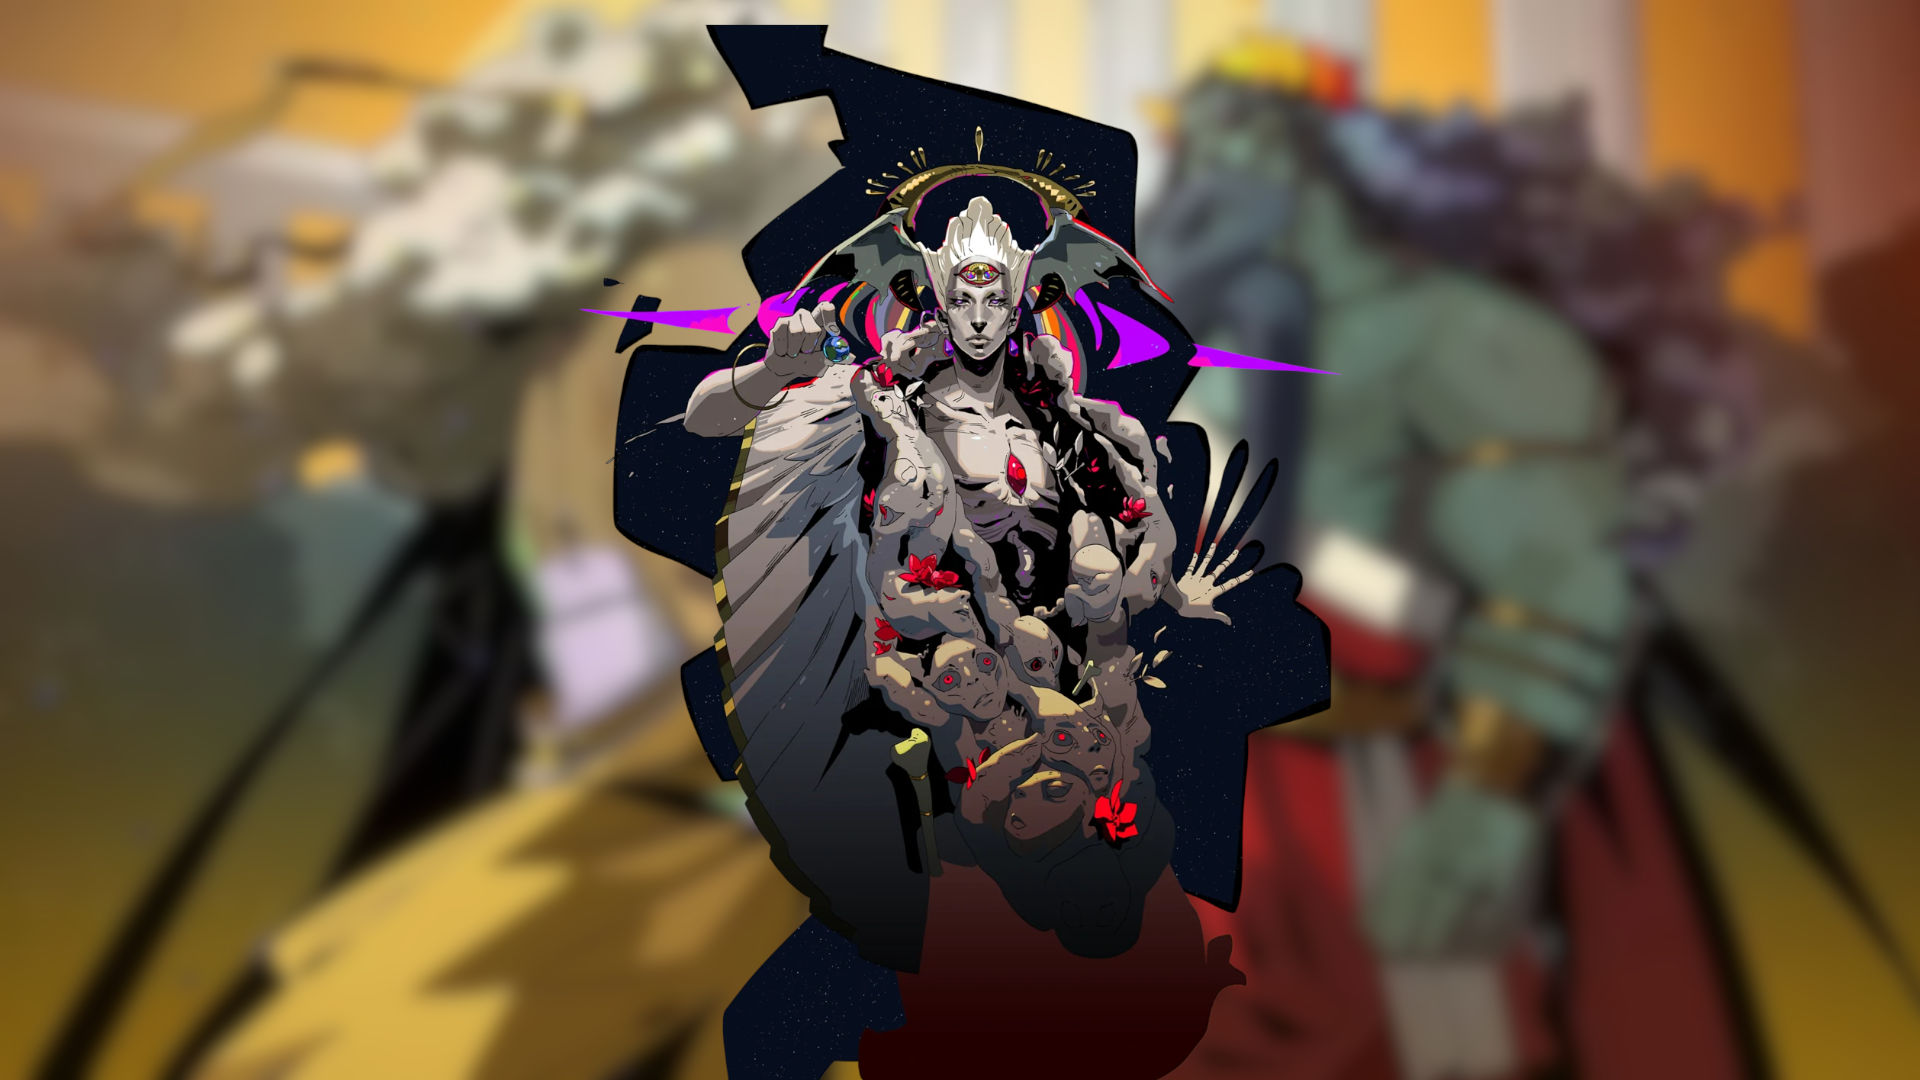 Key art of Chaos, one of the many Hades characters